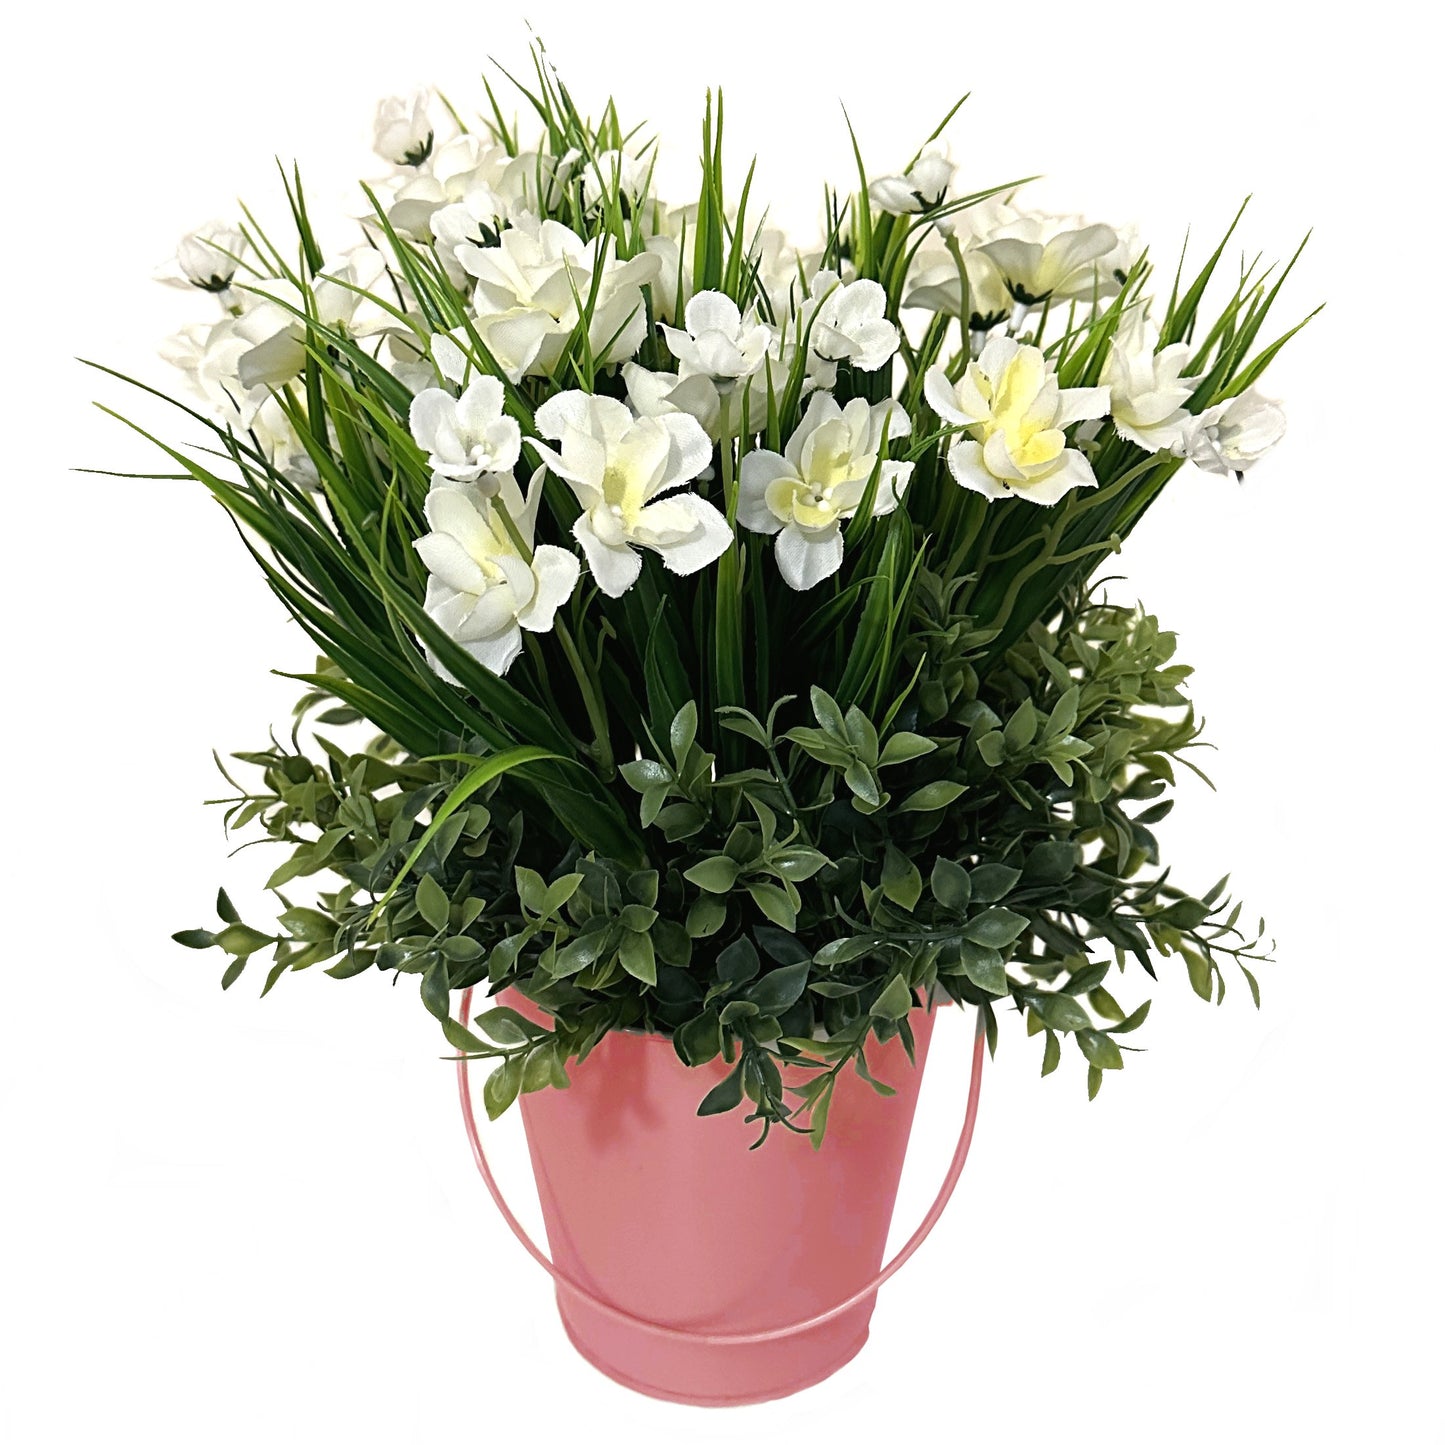 Artificial Grass with White Flowers and Tea Leaf Foliage in a Metal Bucket